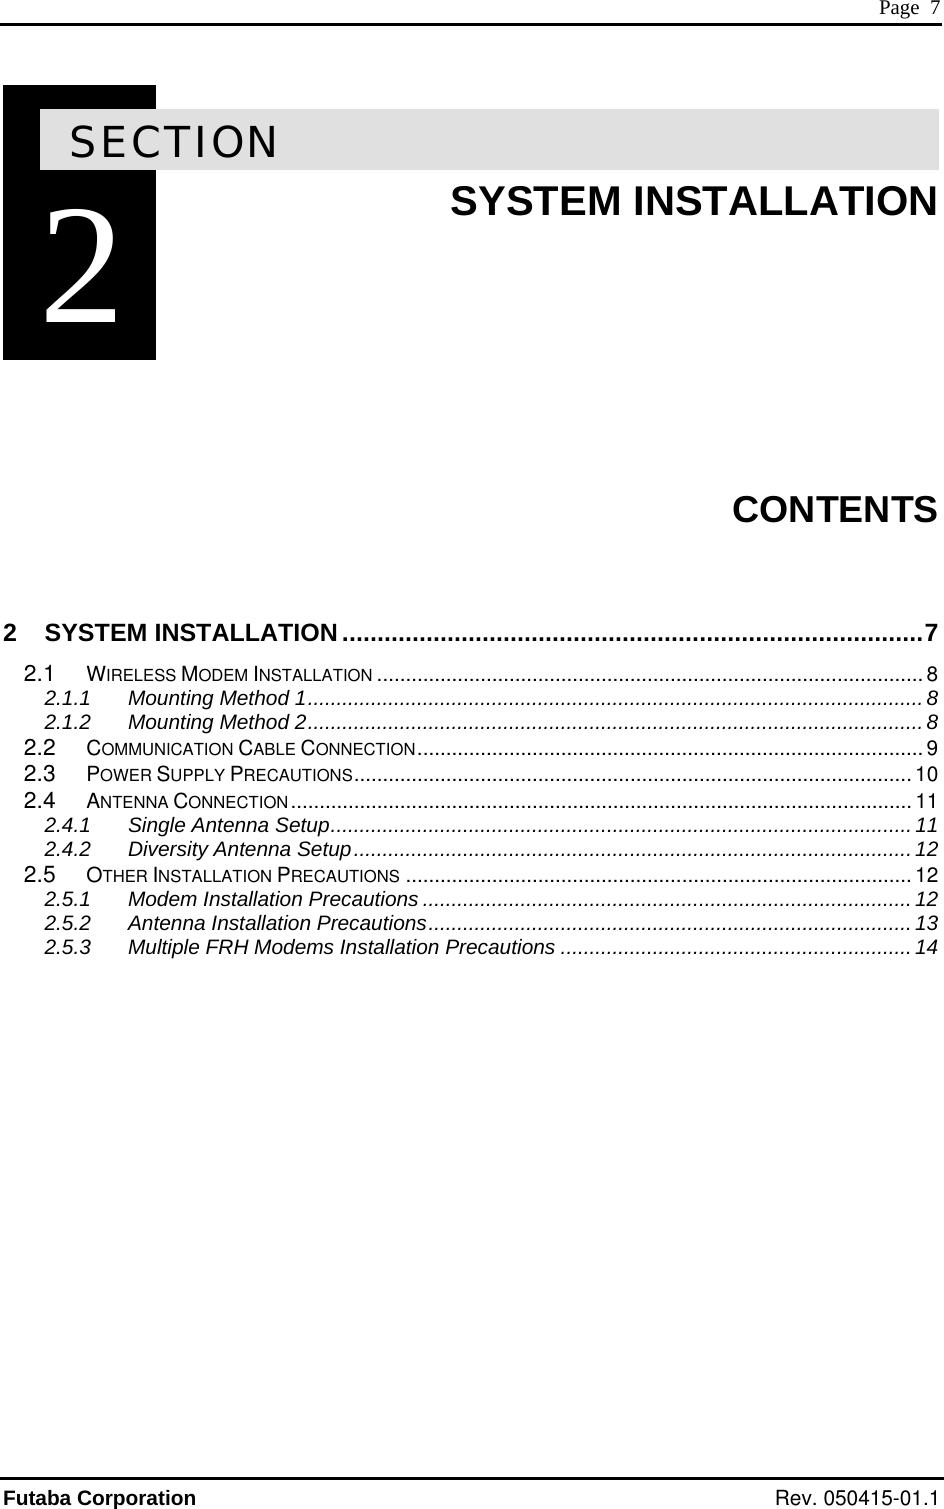  Page  7 2SECTION 2  SYSTEM INSTALLATION        CONTENTS  2 SYSTEM INSTALLATION...................................................................................7 2.1 WIRELESS MODEM INSTALLATION ............................................................................................... 8 2.1.1 Mounting Method 1...........................................................................................................8 2.1.2 Mounting Method 2...........................................................................................................8 2.2 COMMUNICATION CABLE CONNECTION........................................................................................ 9 2.3 POWER SUPPLY PRECAUTIONS................................................................................................. 10 2.4 ANTENNA CONNECTION............................................................................................................ 11 2.4.1 Single Antenna Setup.....................................................................................................11 2.4.2 Diversity Antenna Setup.................................................................................................12 2.5 OTHER INSTALLATION PRECAUTIONS ........................................................................................ 12 2.5.1 Modem Installation Precautions ..................................................................................... 12 2.5.2 Antenna Installation Precautions....................................................................................13 2.5.3 Multiple FRH Modems Installation Precautions .............................................................14   Futaba Corporation Rev. 050415-01.1 